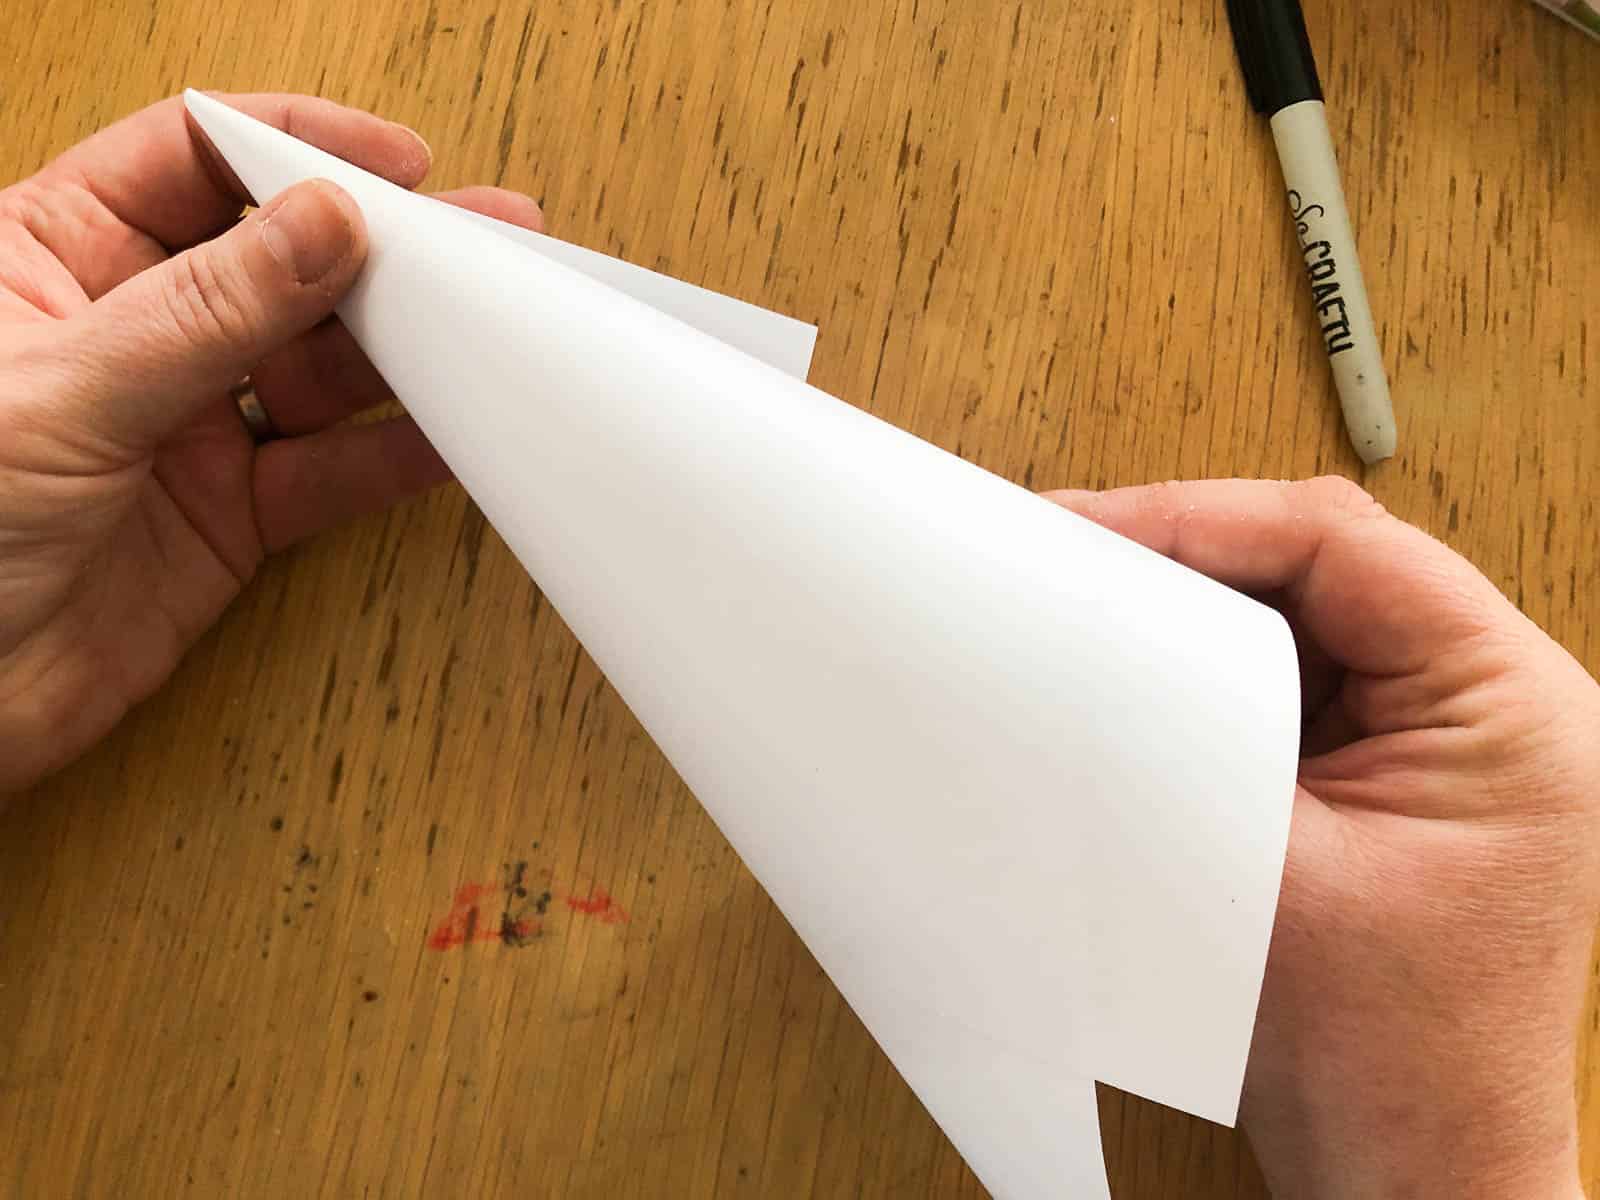 Folding an A4 sheet of paper into a cone.